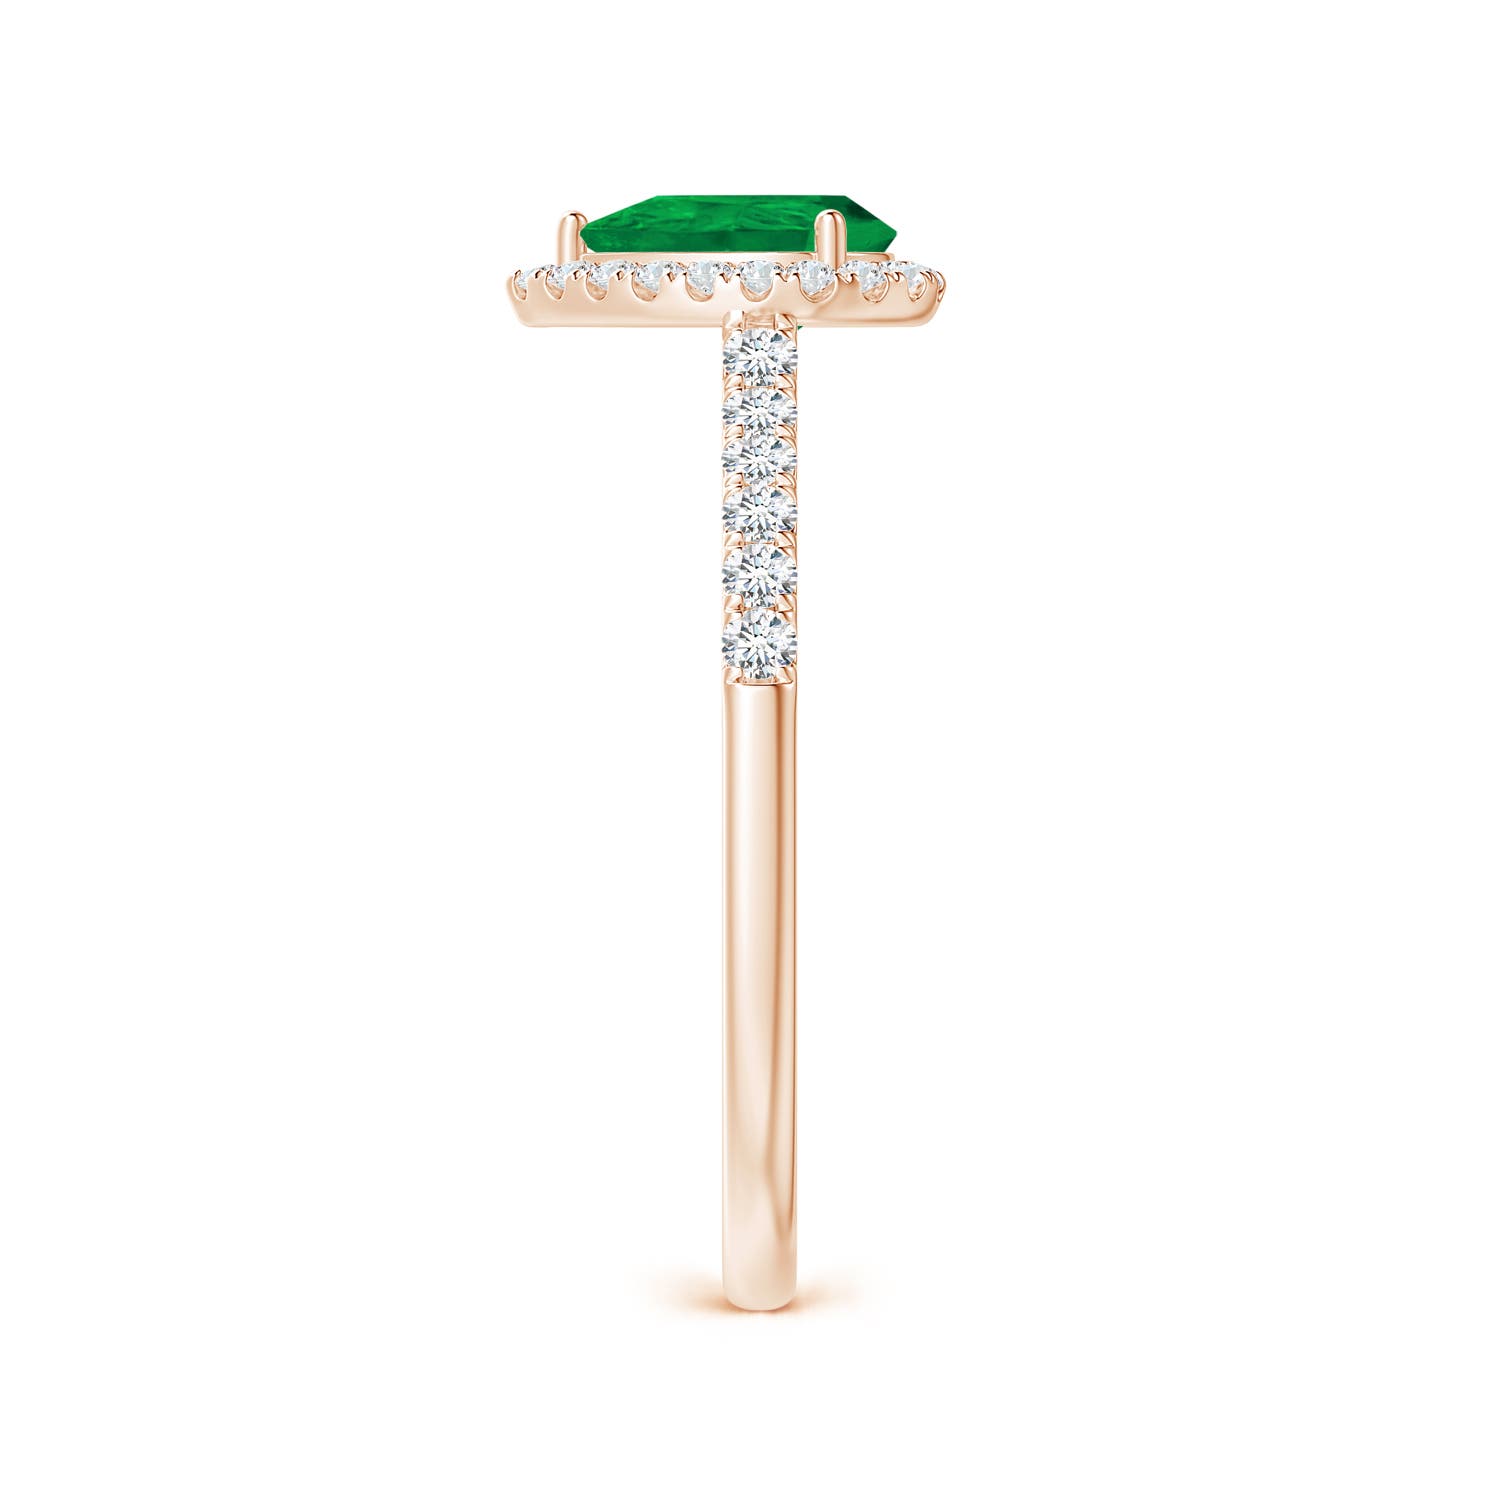 AA - Emerald / 0.88 CT / 14 KT Rose Gold